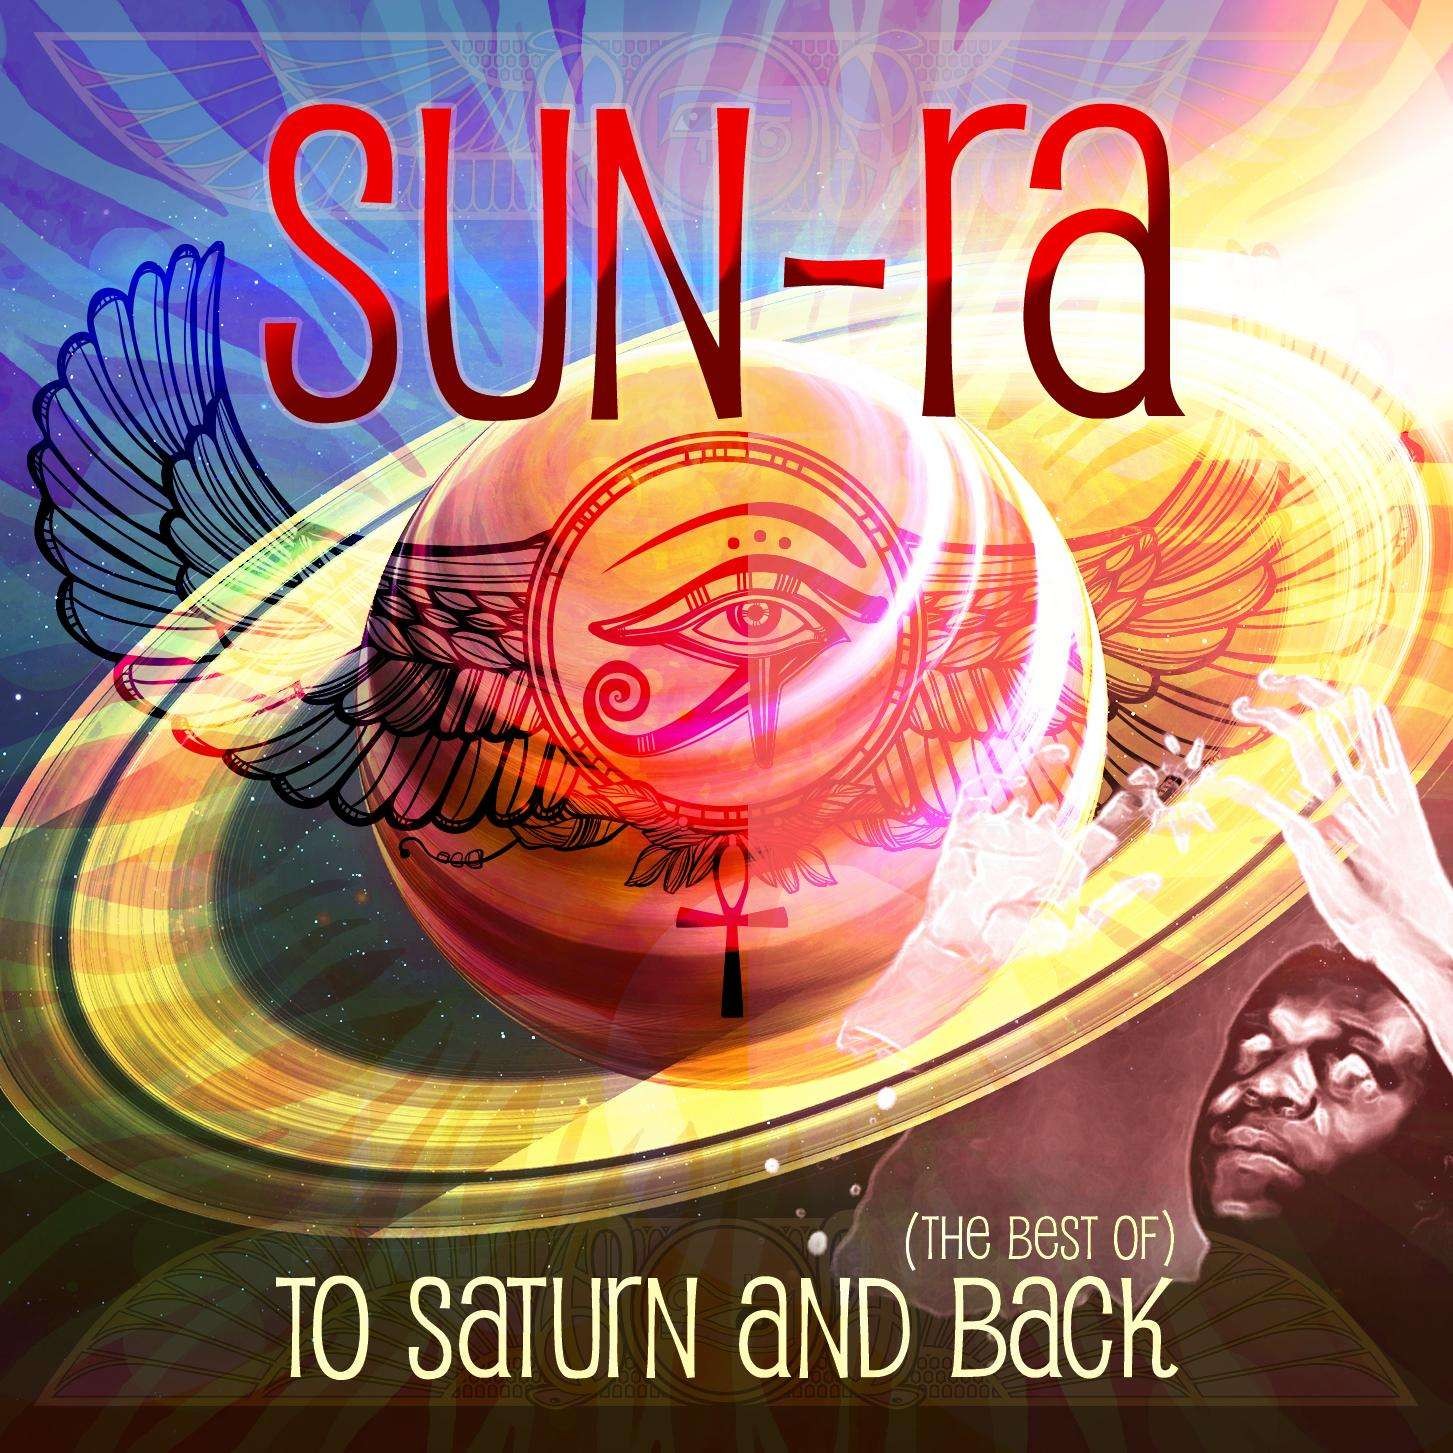 Sun-Ra : To Saturn and back - the best of (2-CD)